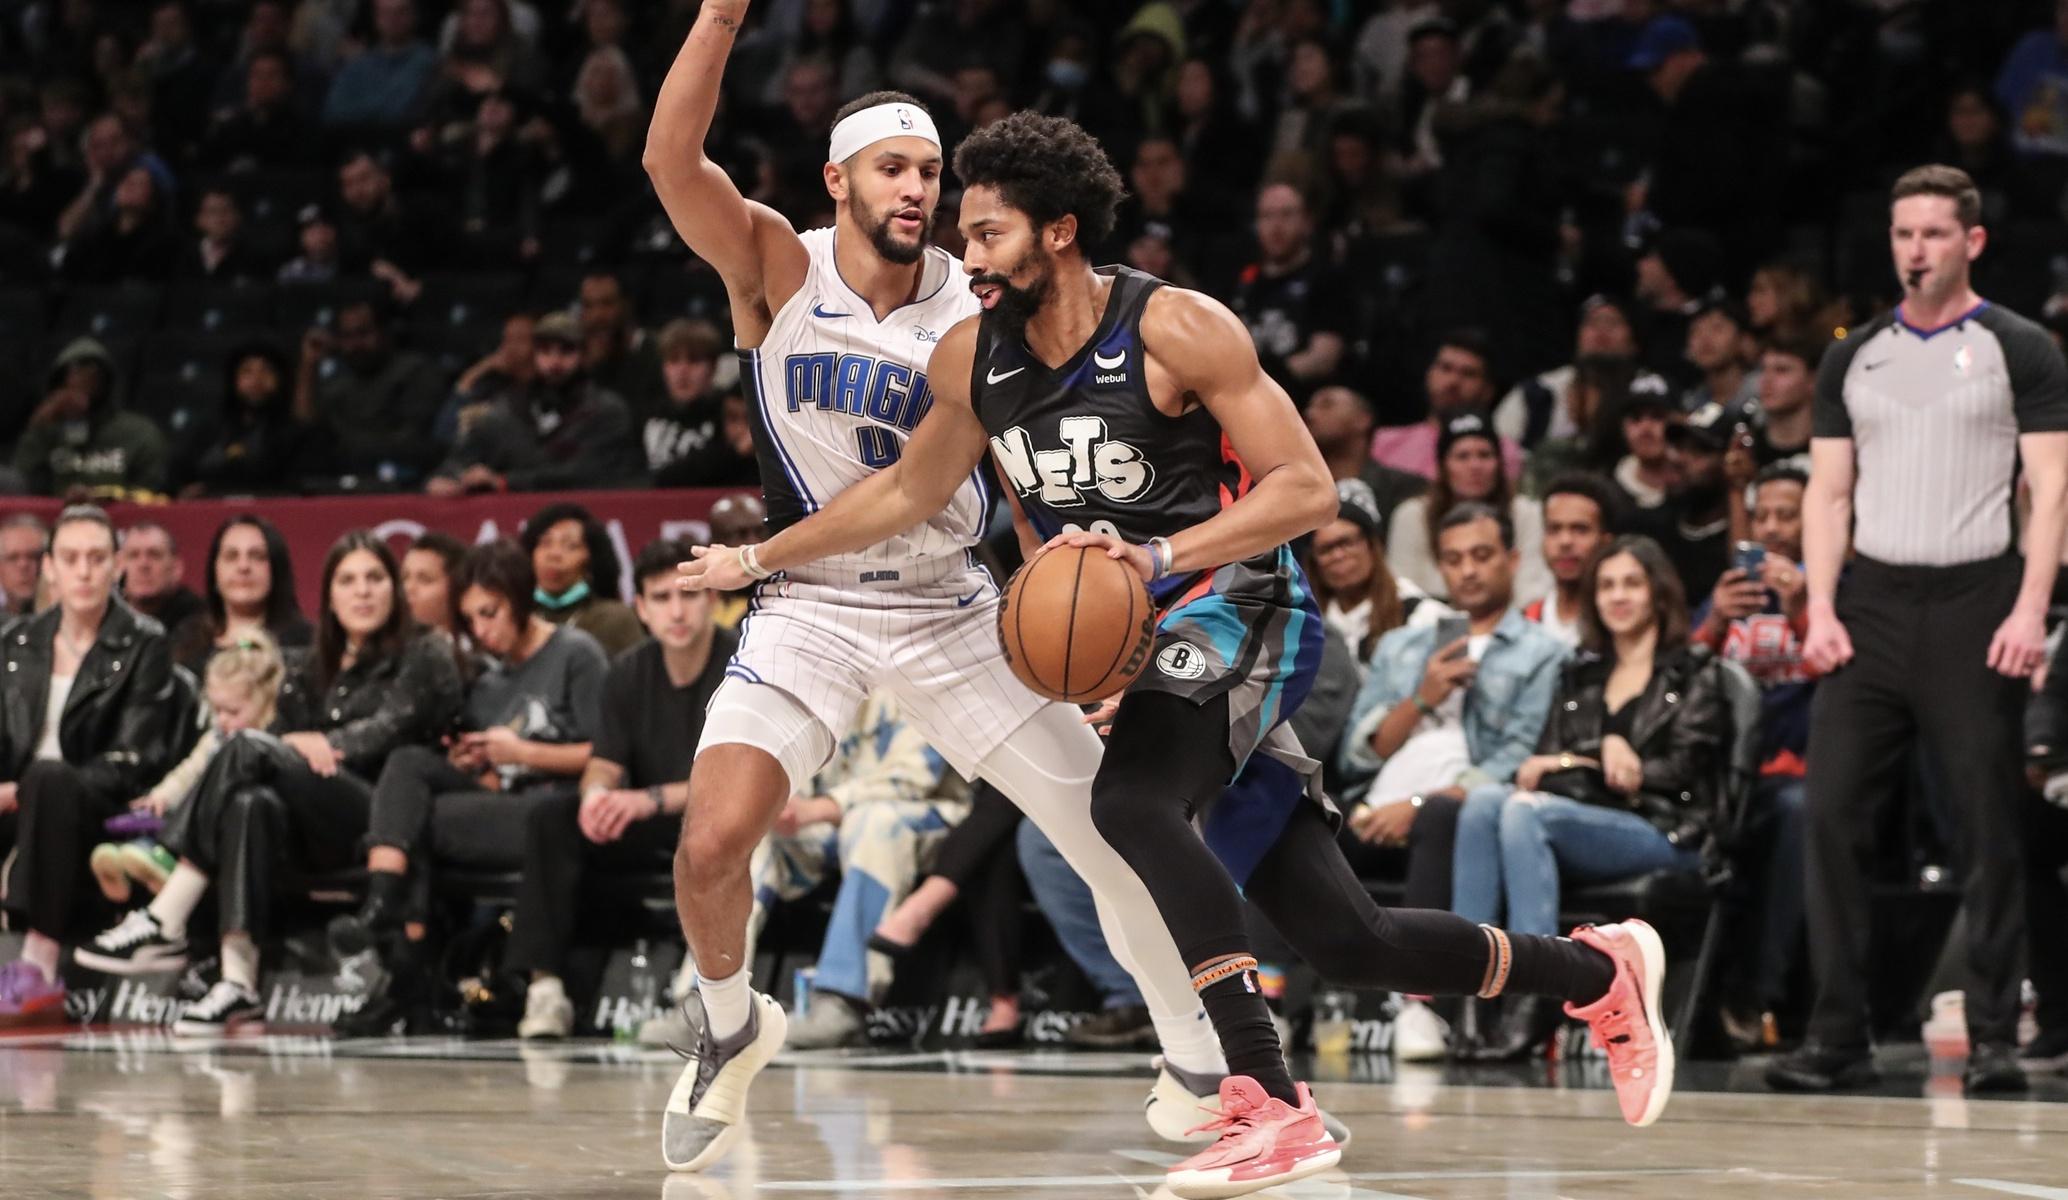 Brooklyn Nets guard Spencer Dinwiddie (26) looks to drive past Orlando Magic guard Jalen Suggs (4) in the second quarter at Barclays Center. / Wendell Cruz-USA TODAY Sports